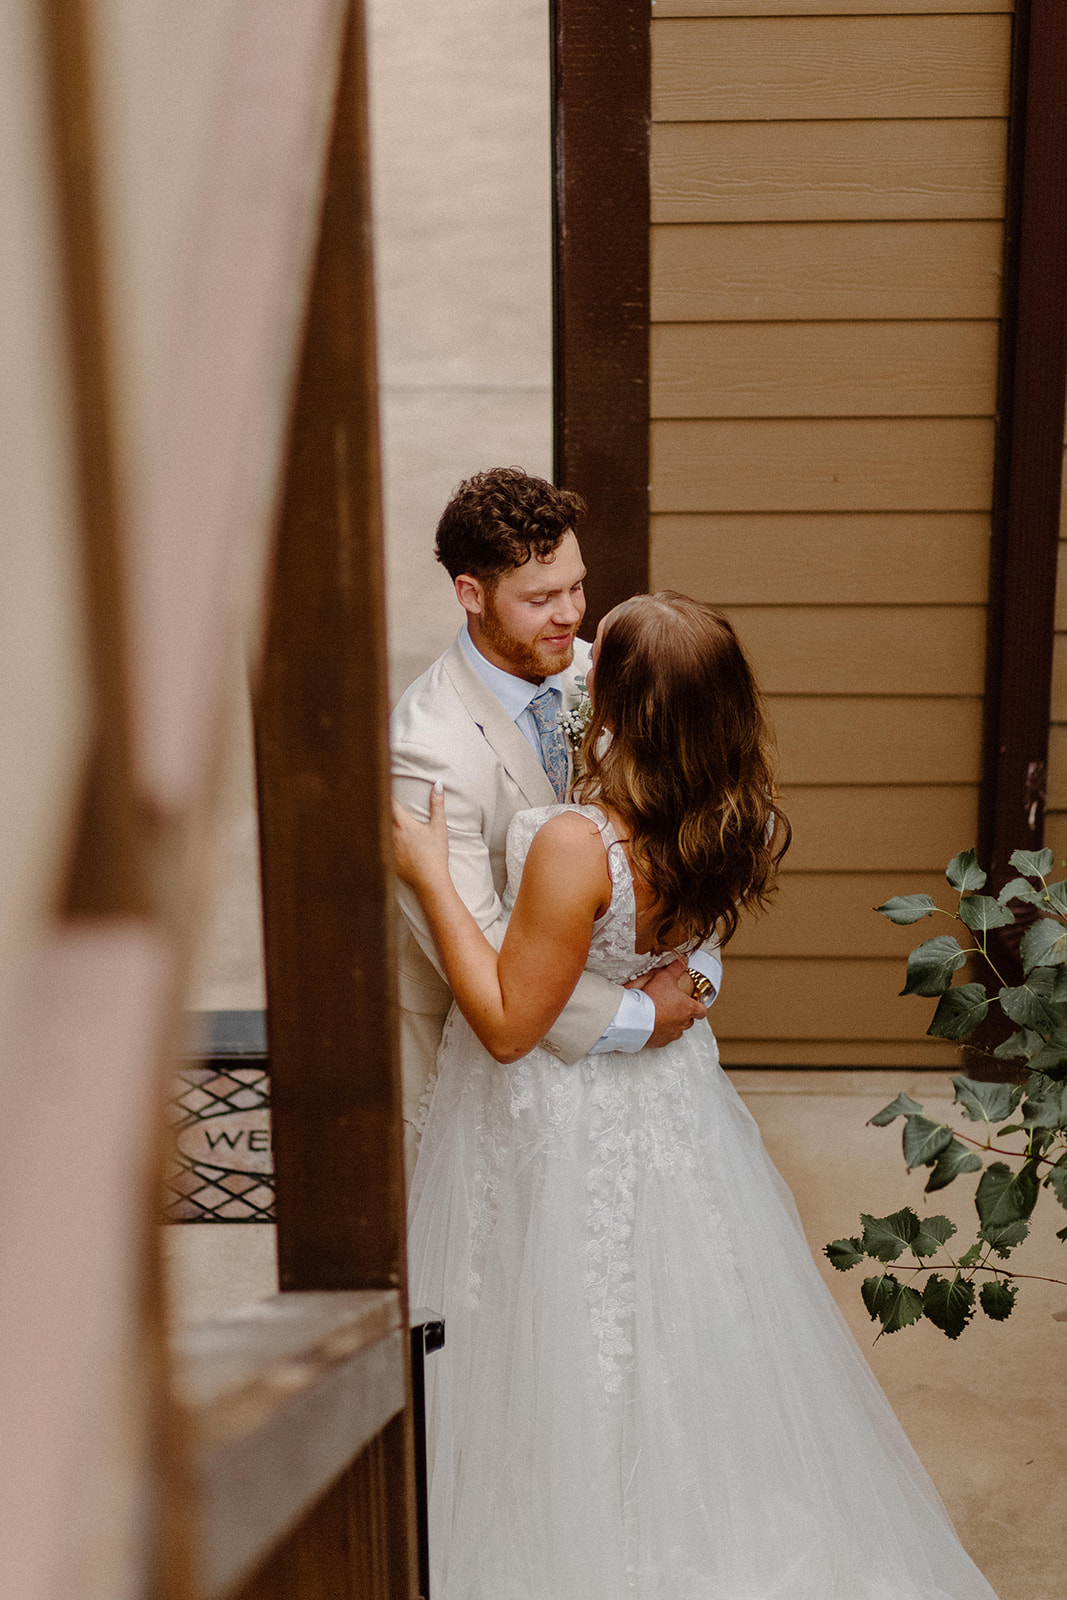 A Dreamy first look with bride and groom